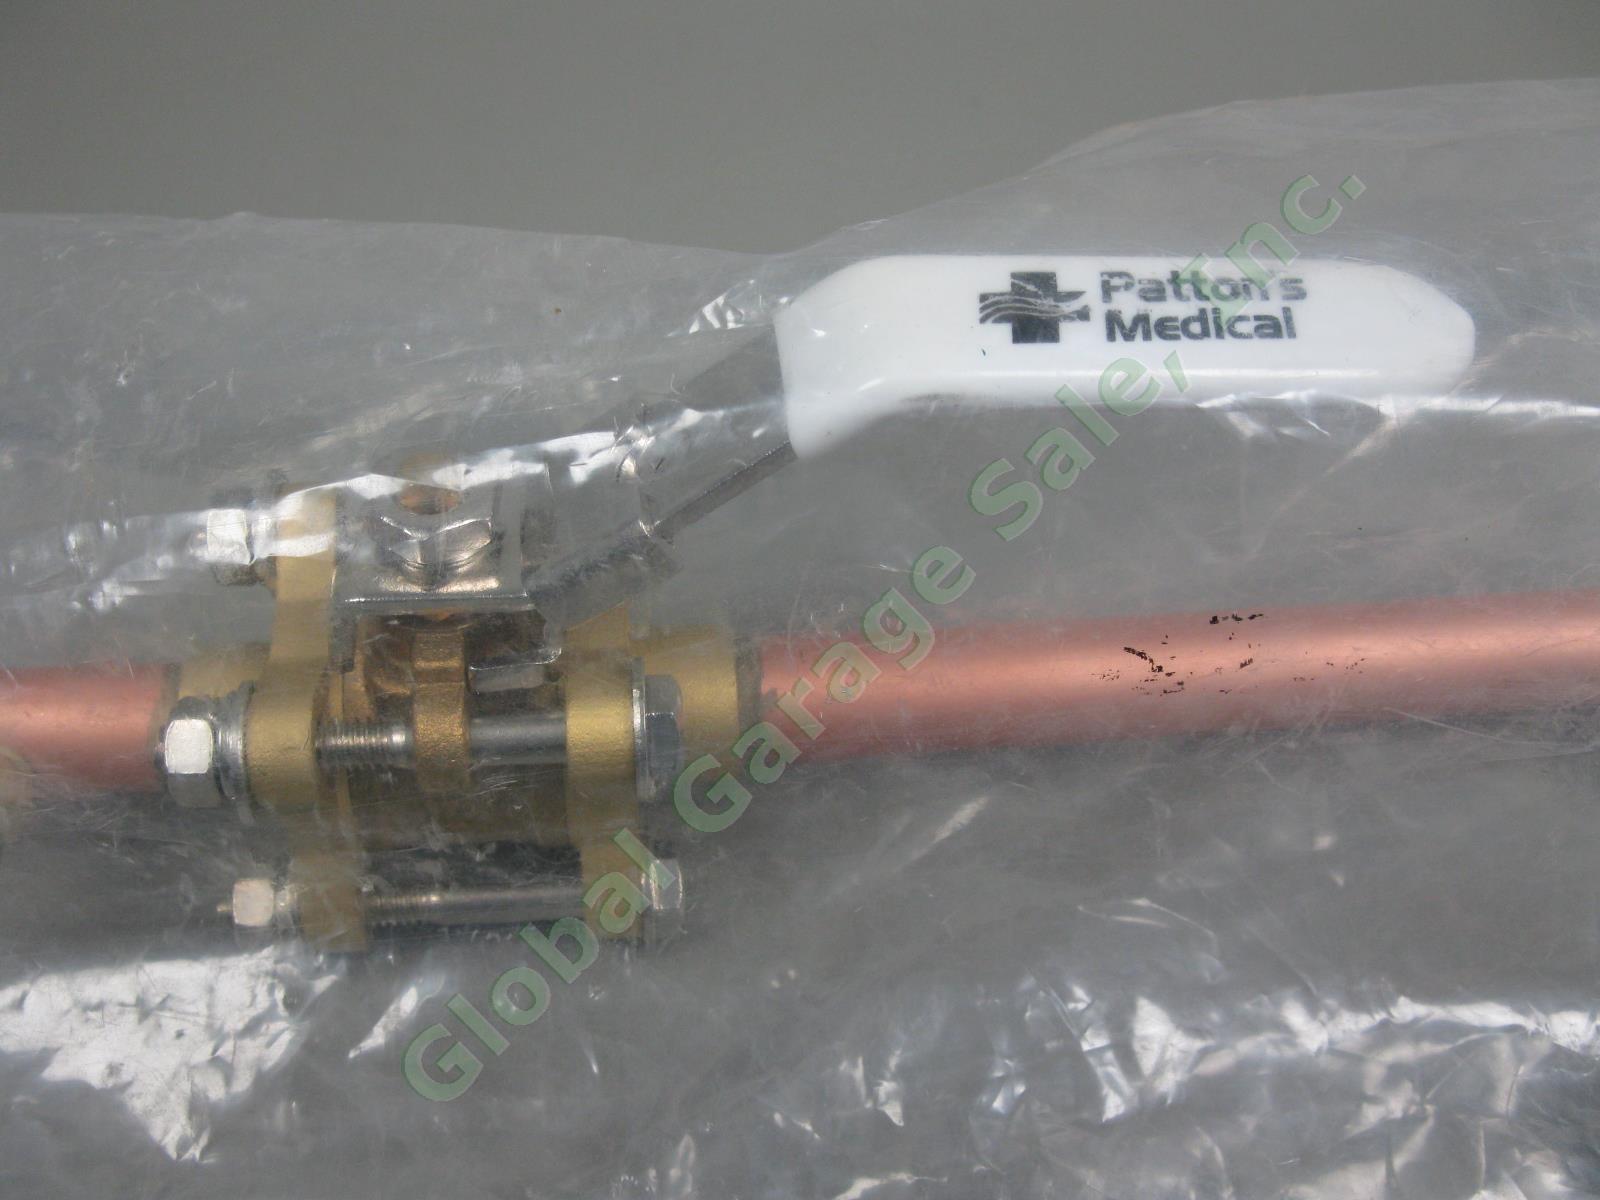 1/2" High Purity Copper Pattons 3pc Medical Gas Isolation Ball Valve Purge Ports 1